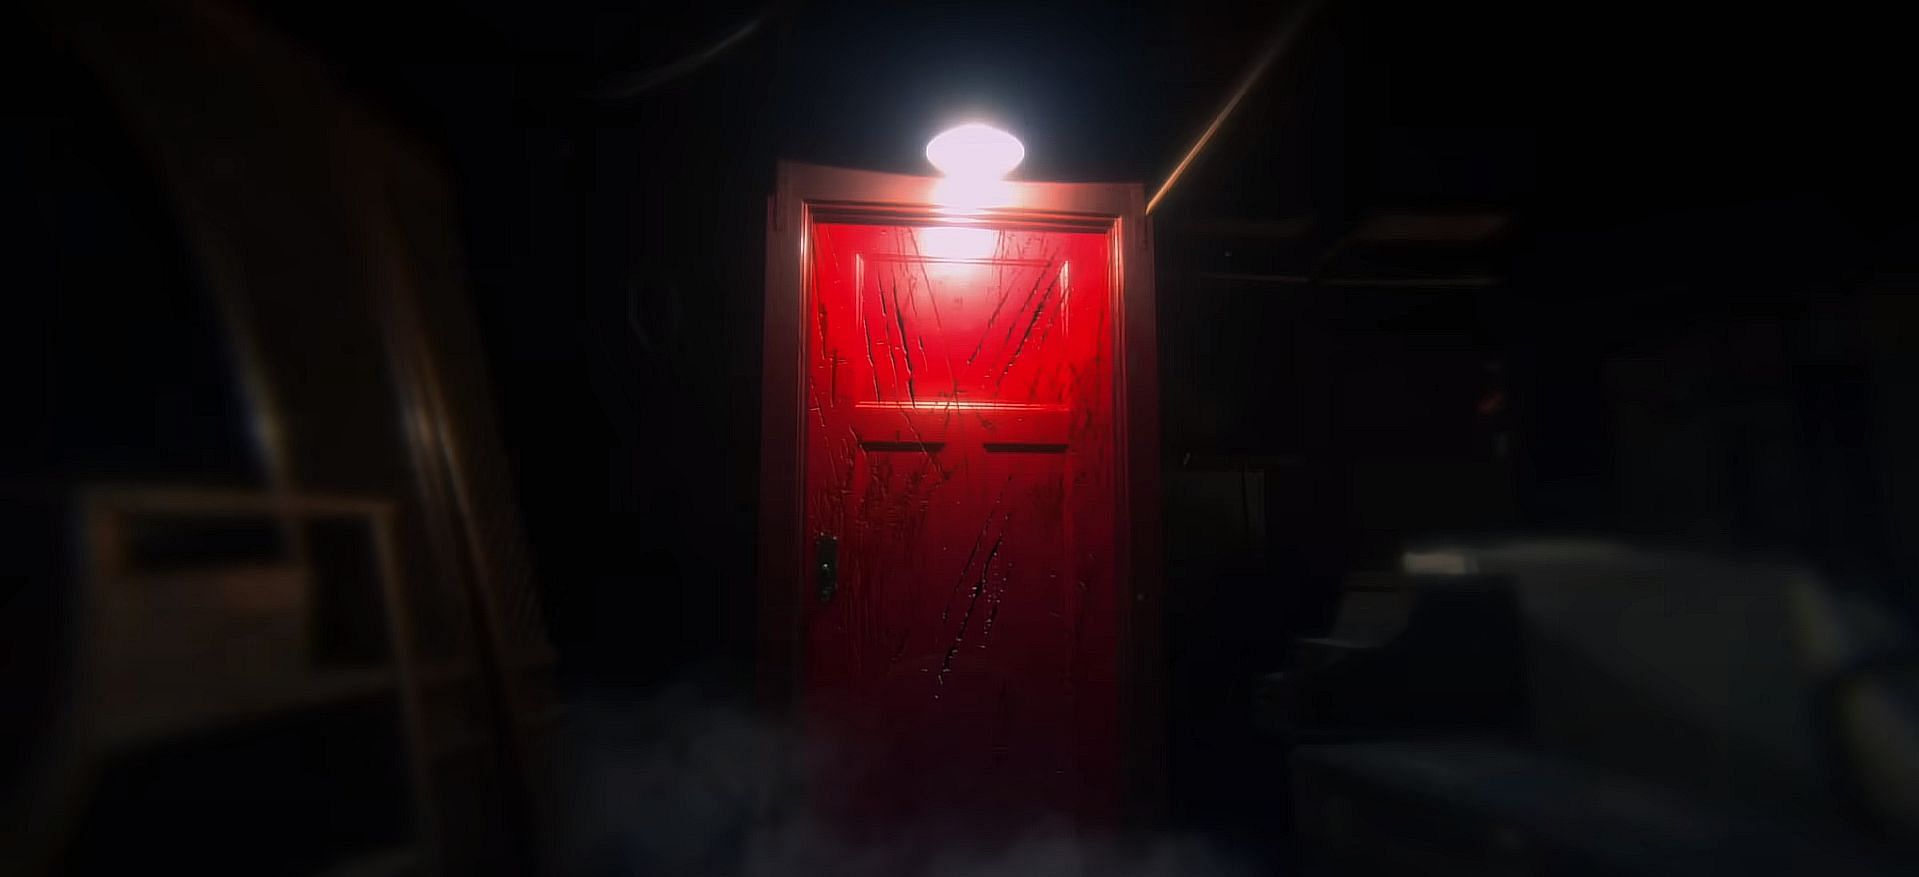 Insidious: The Red Door - Wikipedia